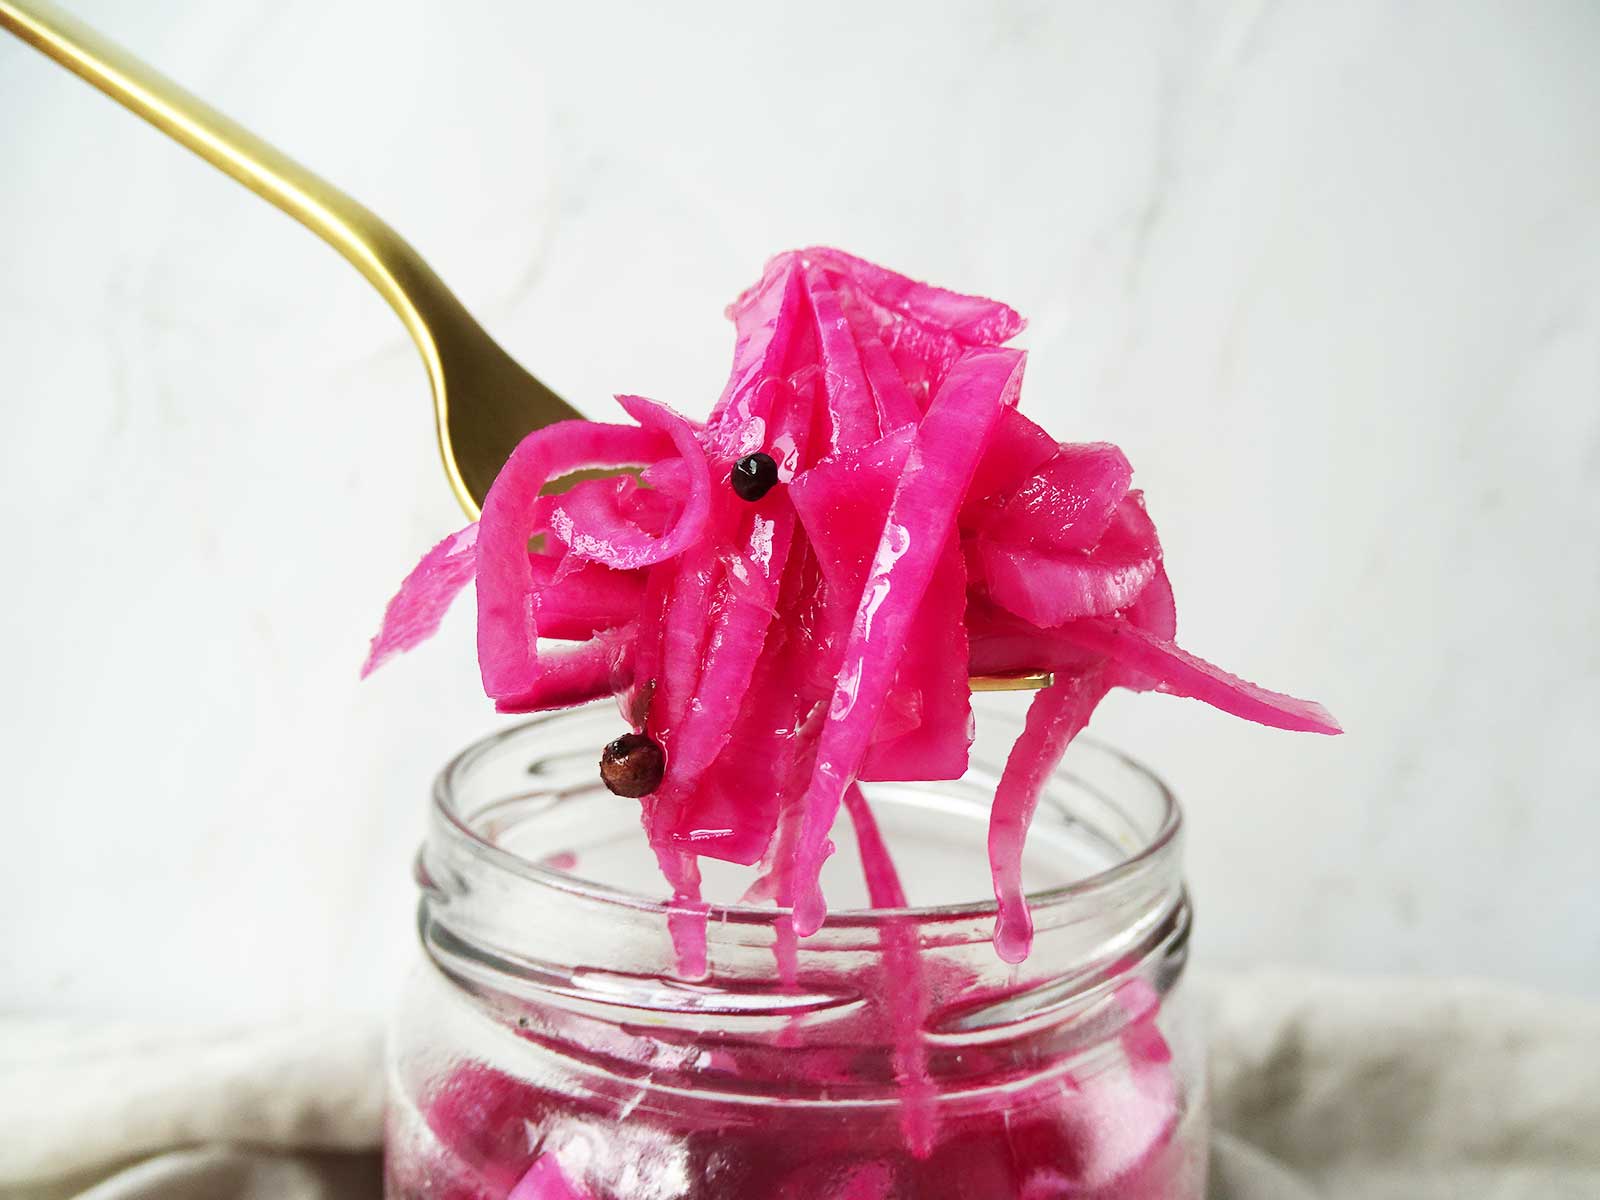 Red Onion and Lime Pickles Recipe